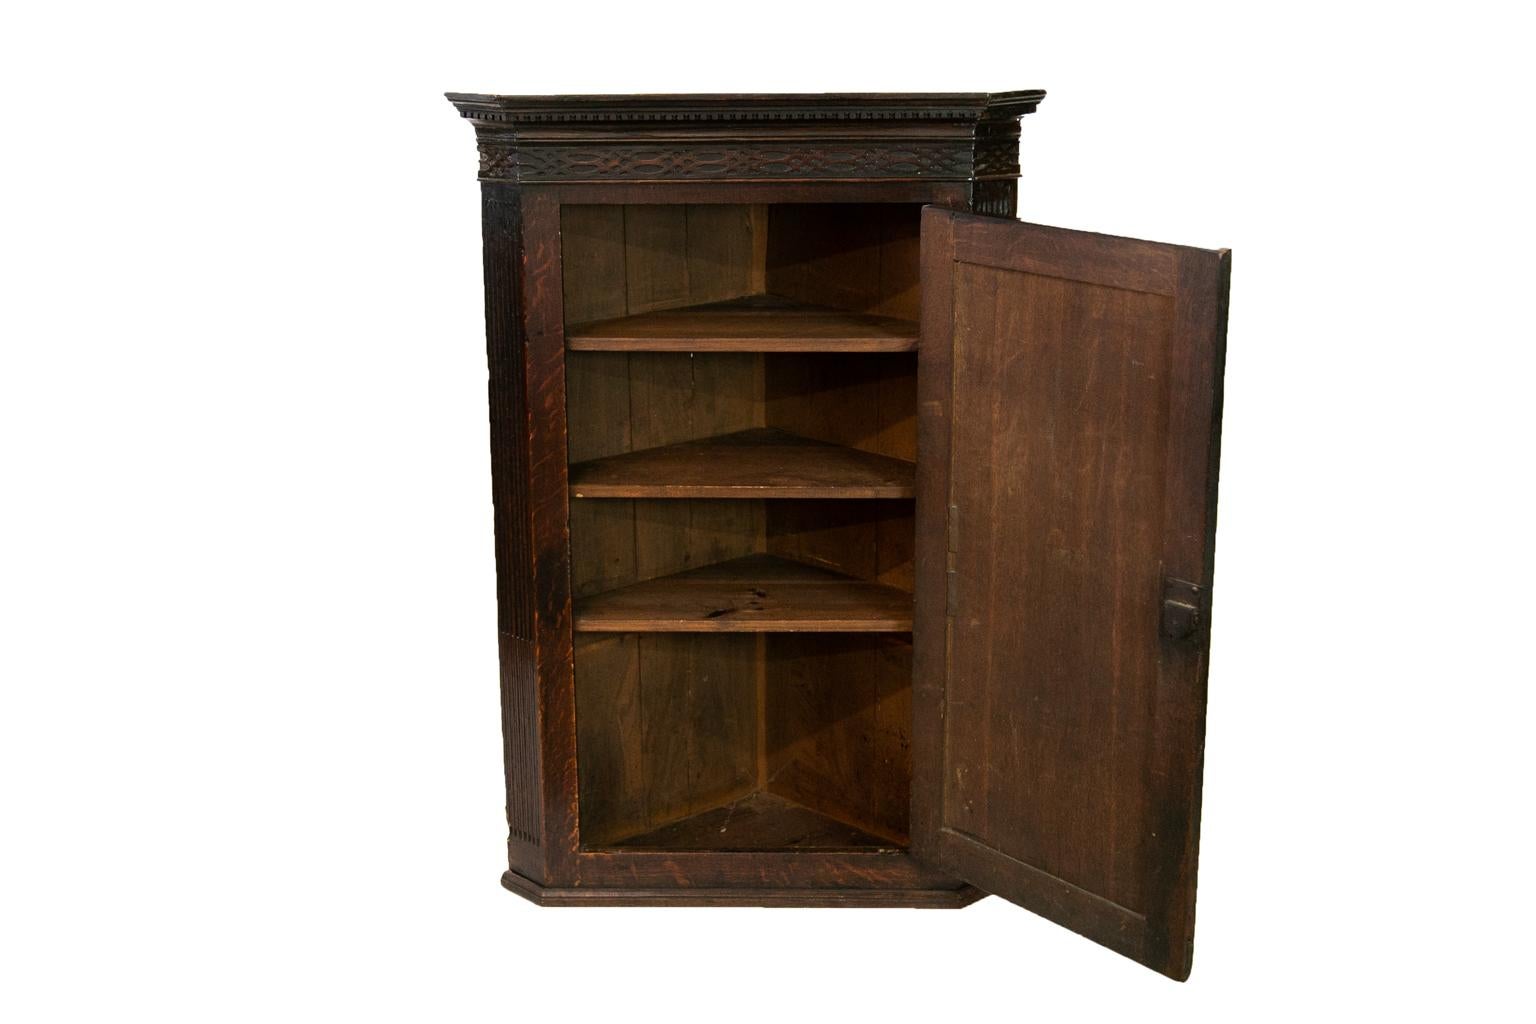 Hanging English Oak Corner Cupboard In Good Condition For Sale In Wilson, NC